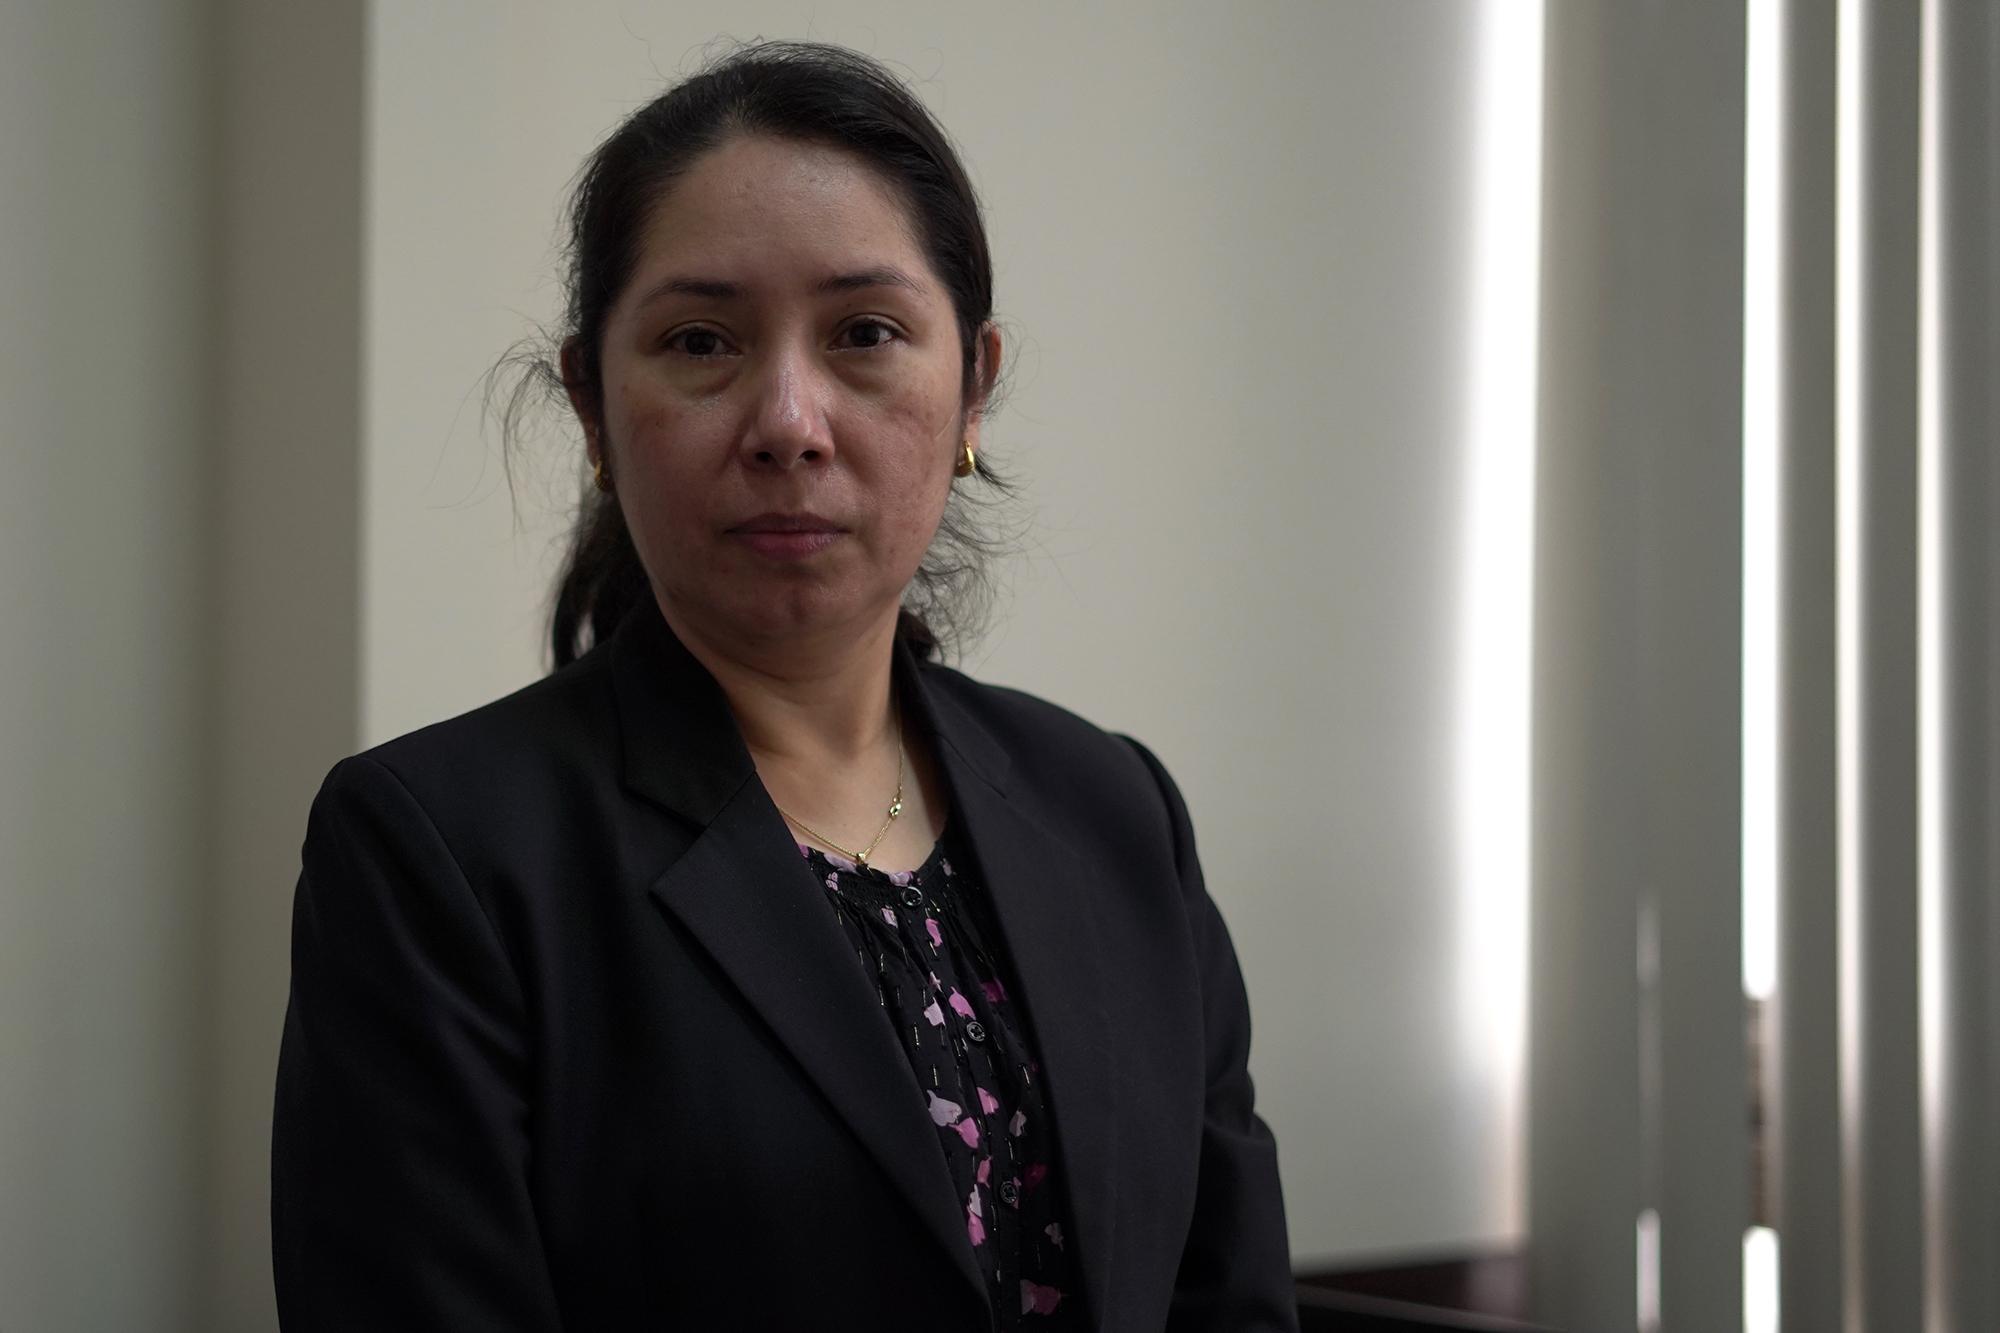 Judge Erika Aifán in her office at Guatemala City’s Palace of Justice during an interview with El Faro on June 11, 2021. Aifán is a high-risk judge, and she monitors corruption and organized crime cases. She has protective measures issued by the IACHR because of the threats she has faced since 2006, when she was assigned to the city of Jutiapa, one of the most dangerous in the country. Photo: Víctor Peña/El Faro